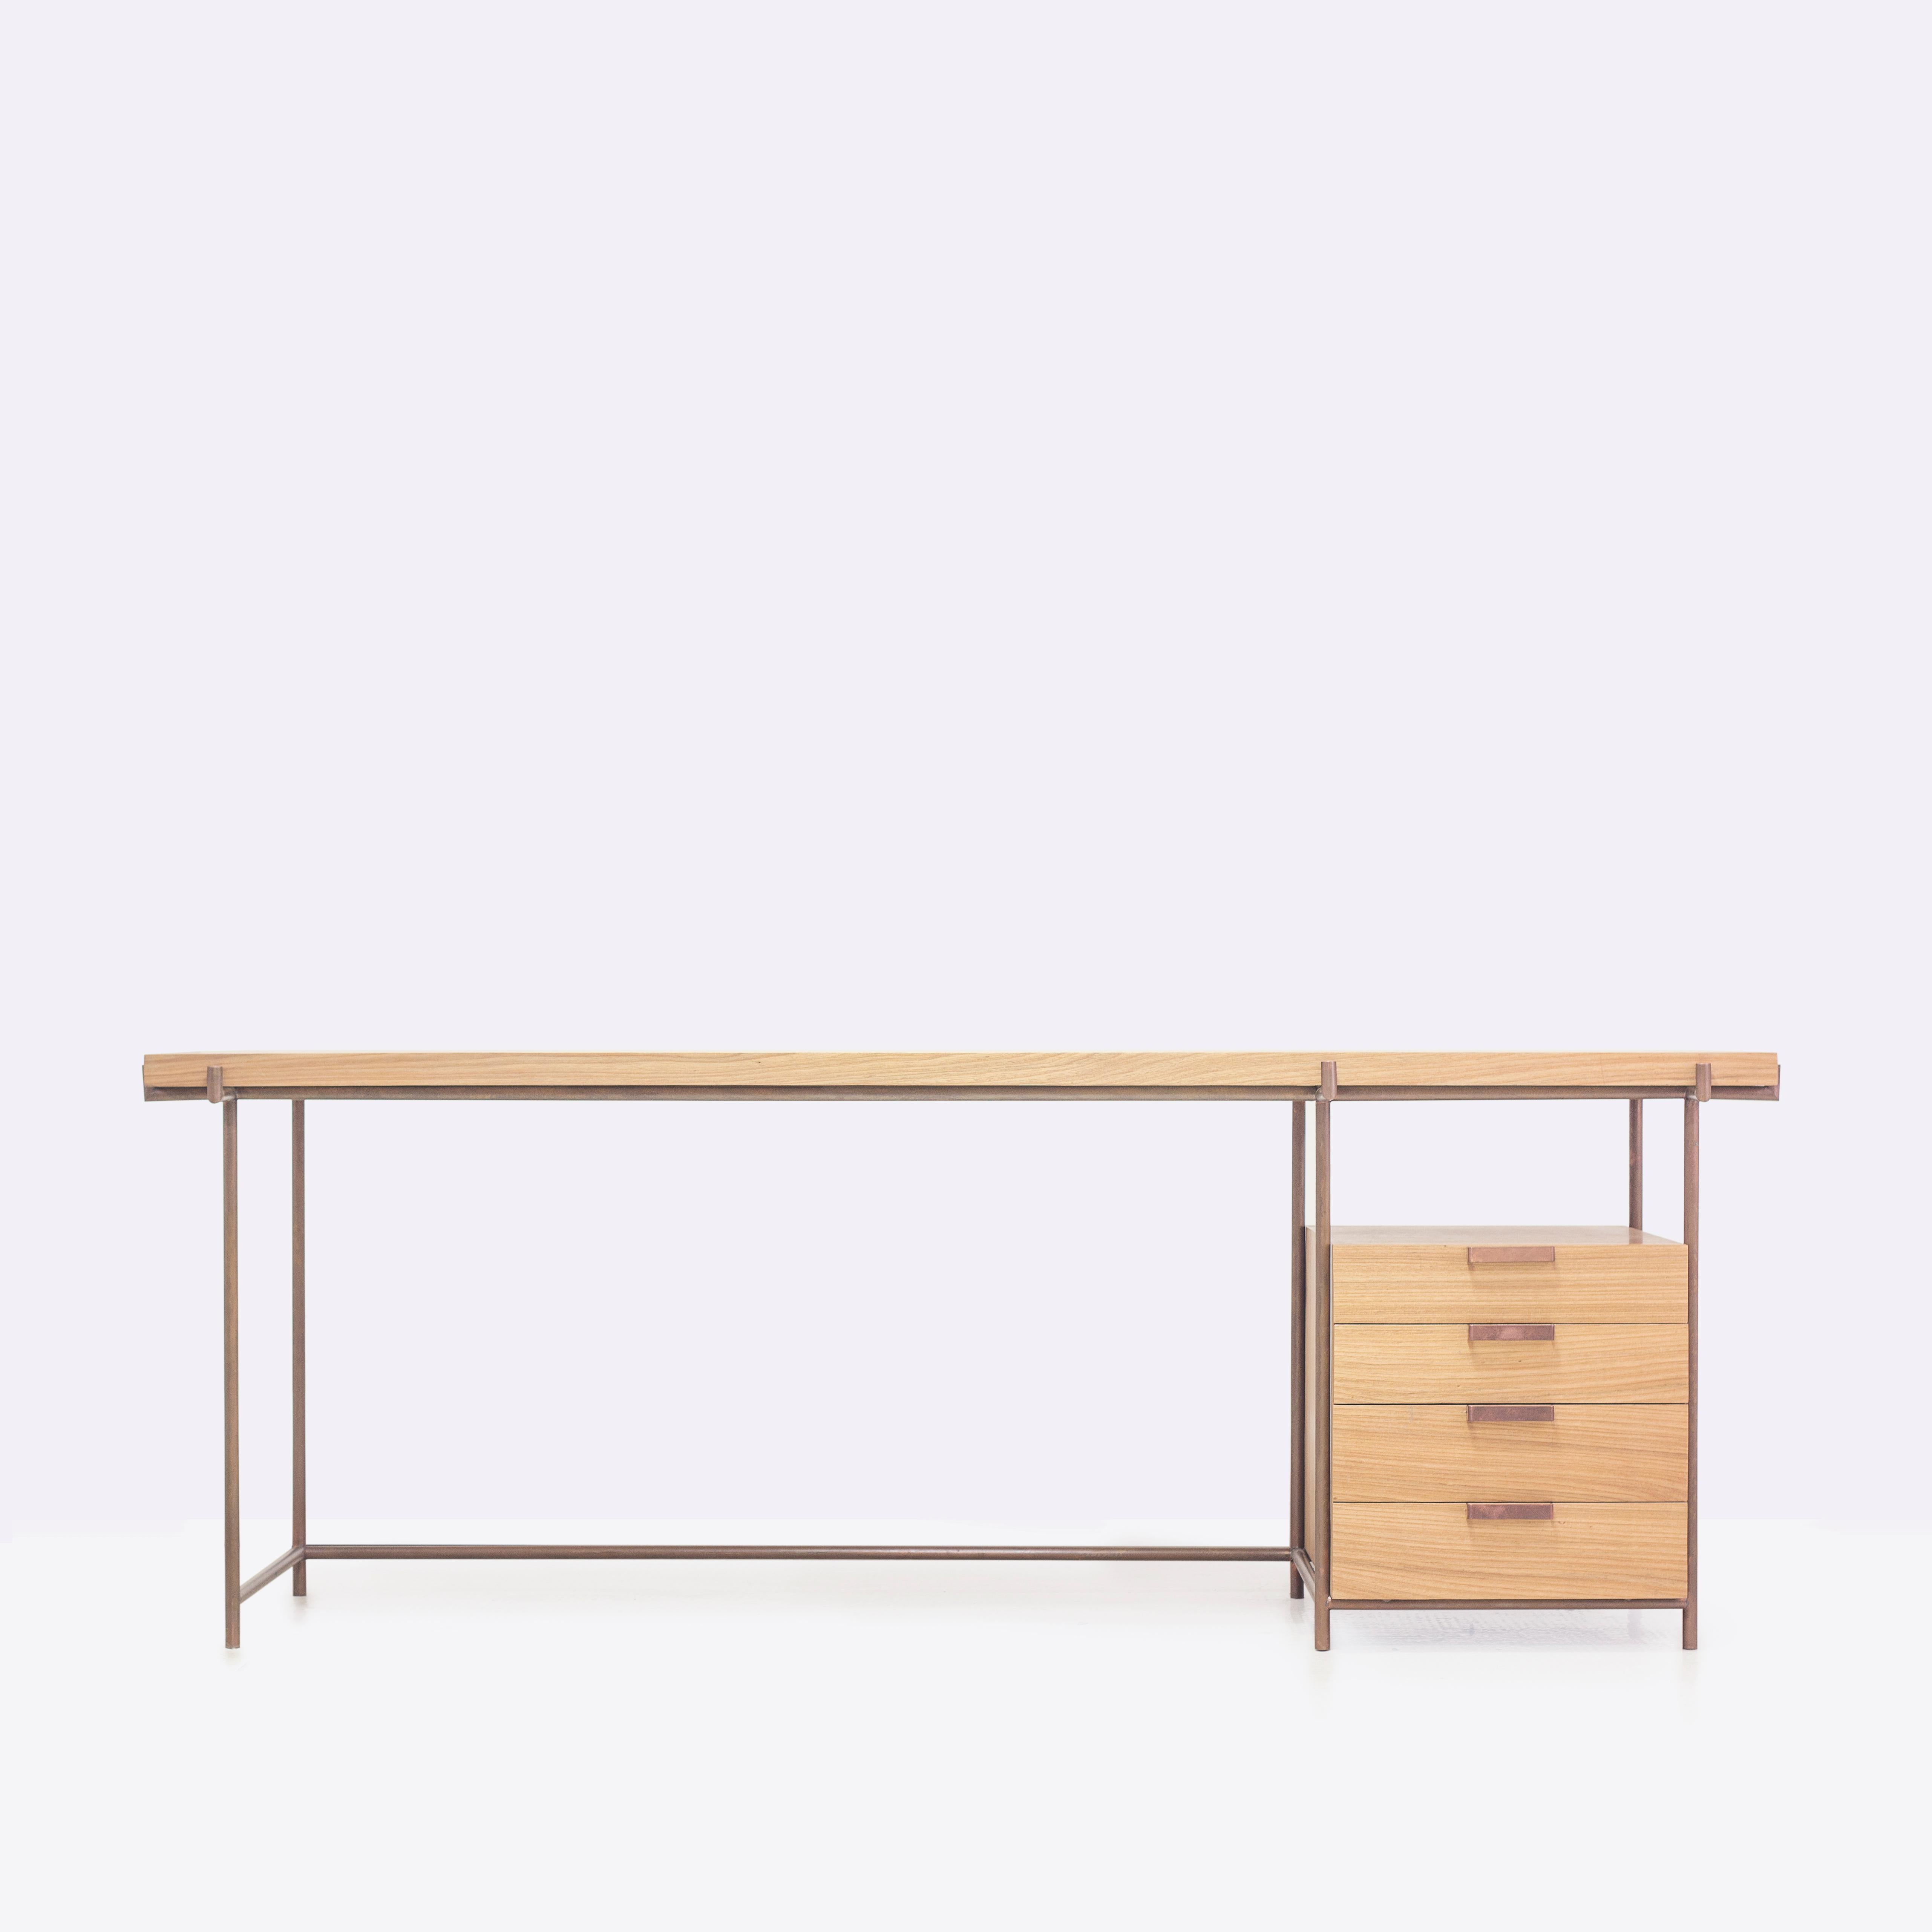 Marajoara desk with drawer is a study upon Mid Century Modern utilitarian furniture, with Brazilian Native Arte Reference.
The modern design style is one of the most influential movements in contemporary Brazilian design. Among the main names of